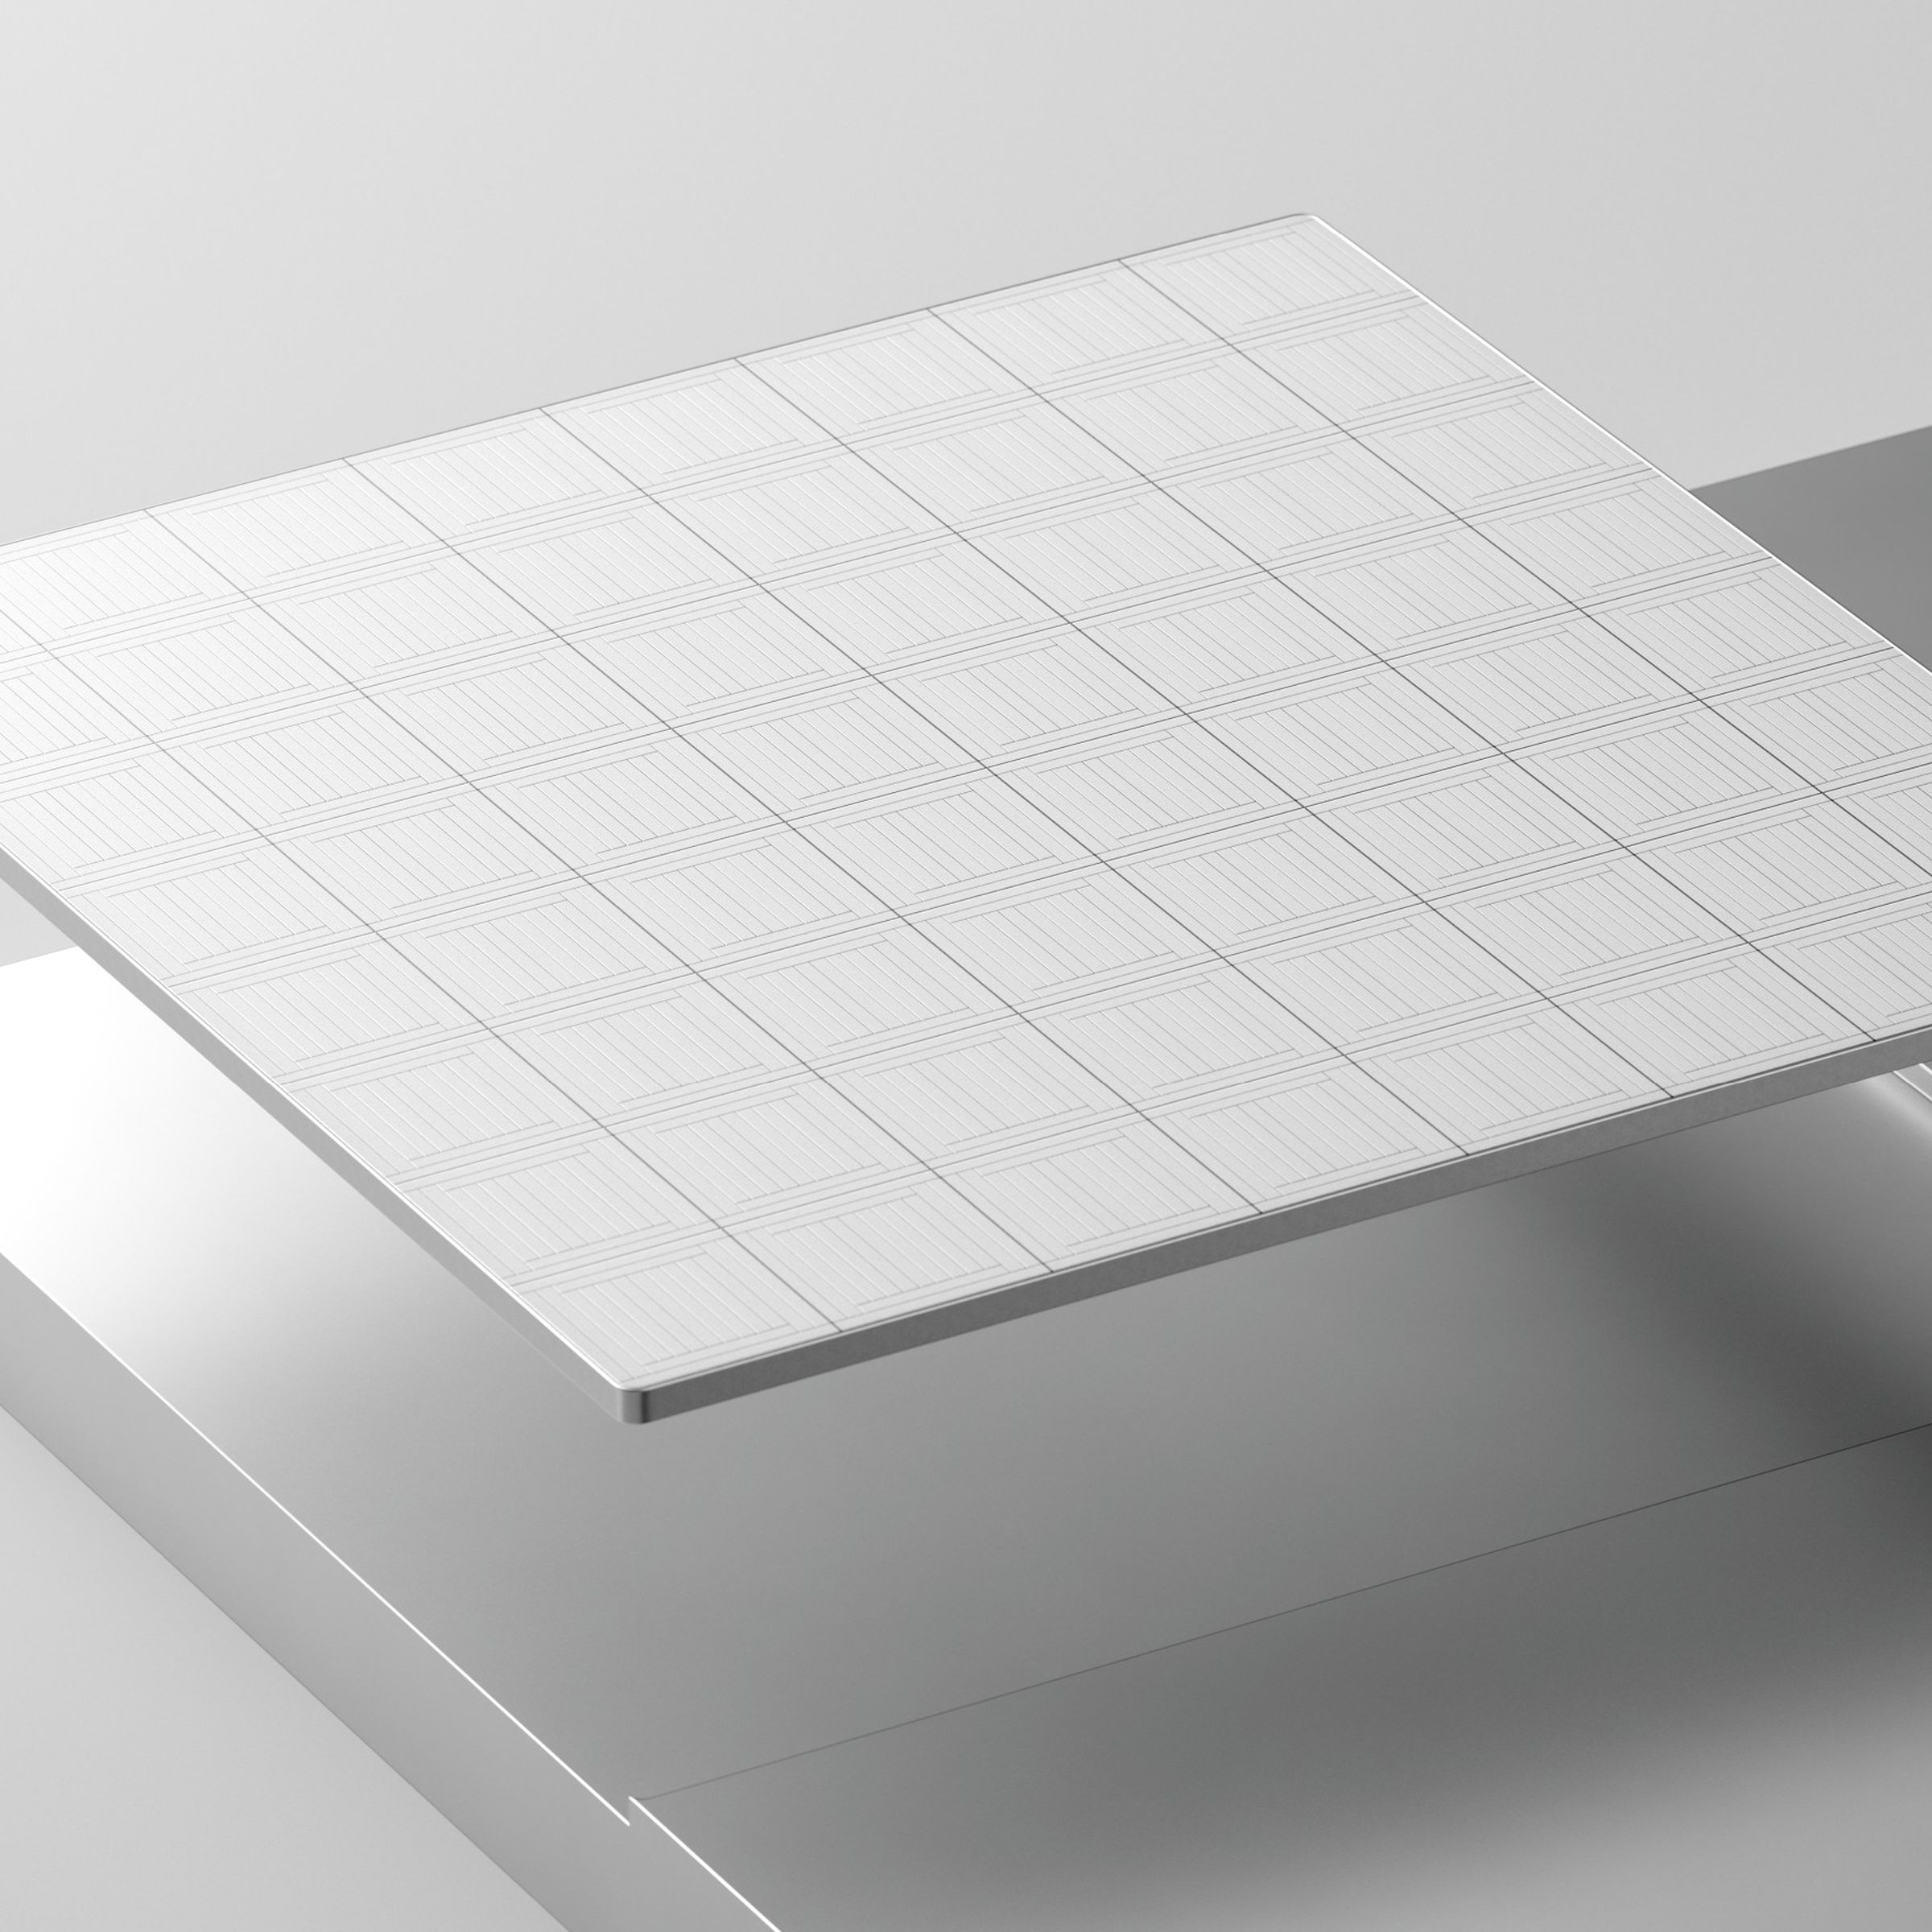 A white tile representative of a computer chip above a shiny silver metal surface that the chip appears to have been milled out of